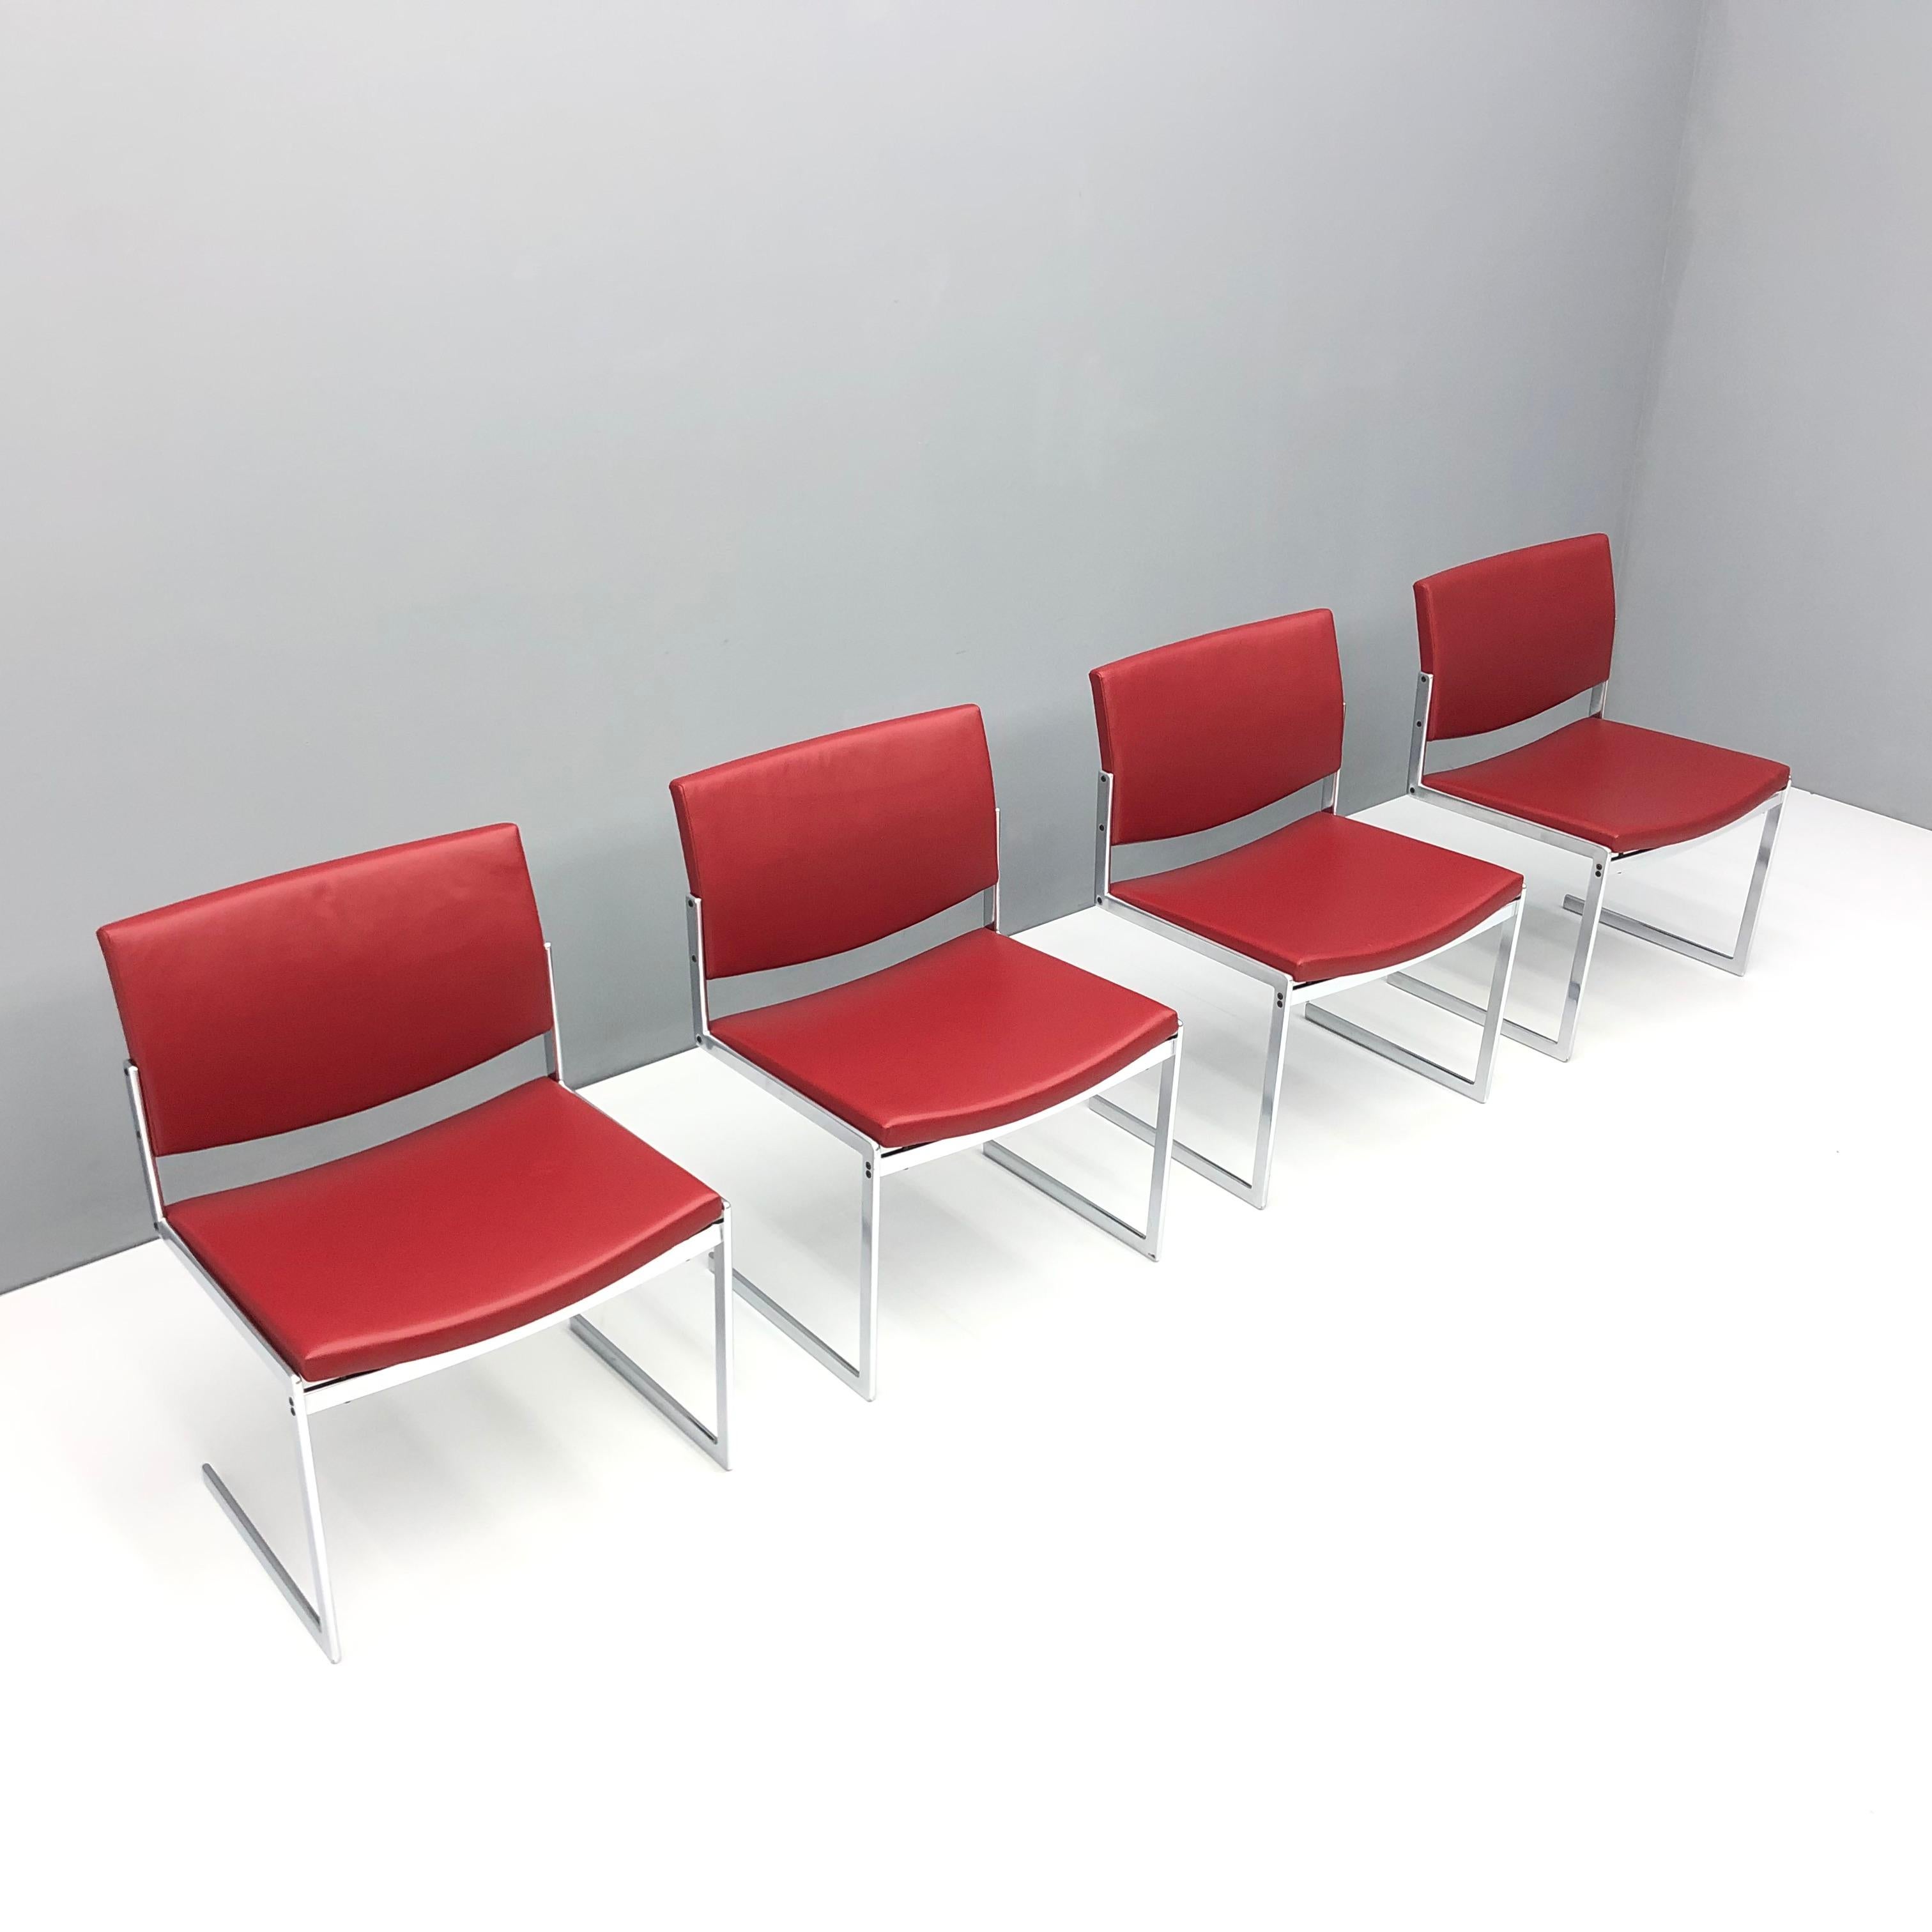 Rare set of four Jørgen Kastholm JK 770 chairs, Kill International 1970. Only a few month in production. Polished steel and red new leather. Very comfortable. 
H 80.5 cm, SH 43.5 cm, W 57.5 cm, D 50 cm.
Very good condition!

Worldwide